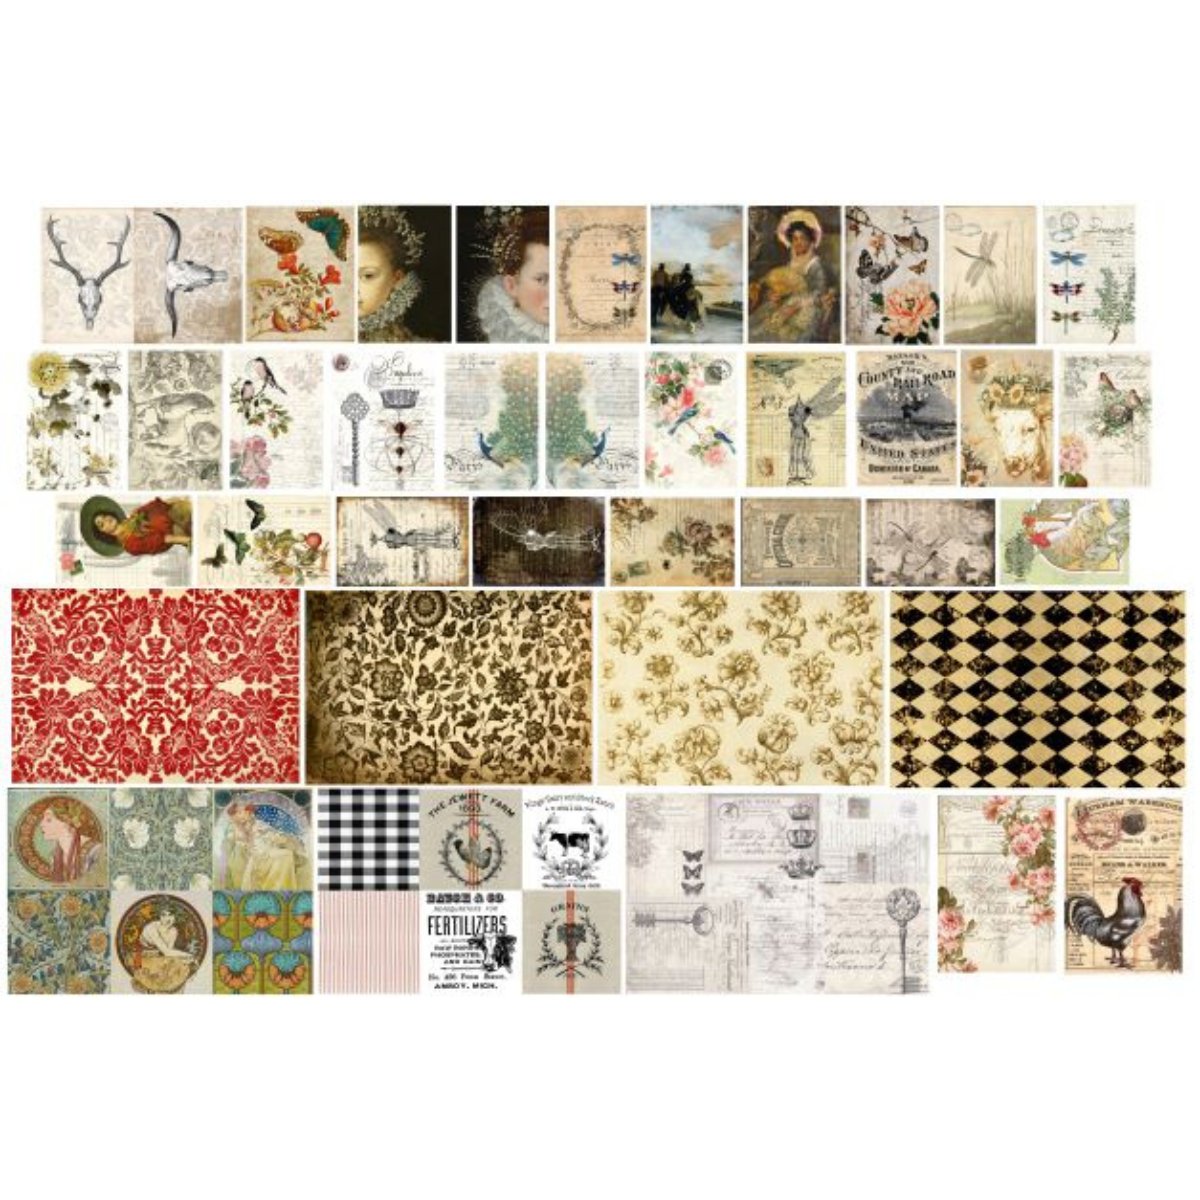 Roycycled Treasures - Roycycled Catalogue Decoupage Paper - 20x30in - Rustic River Home